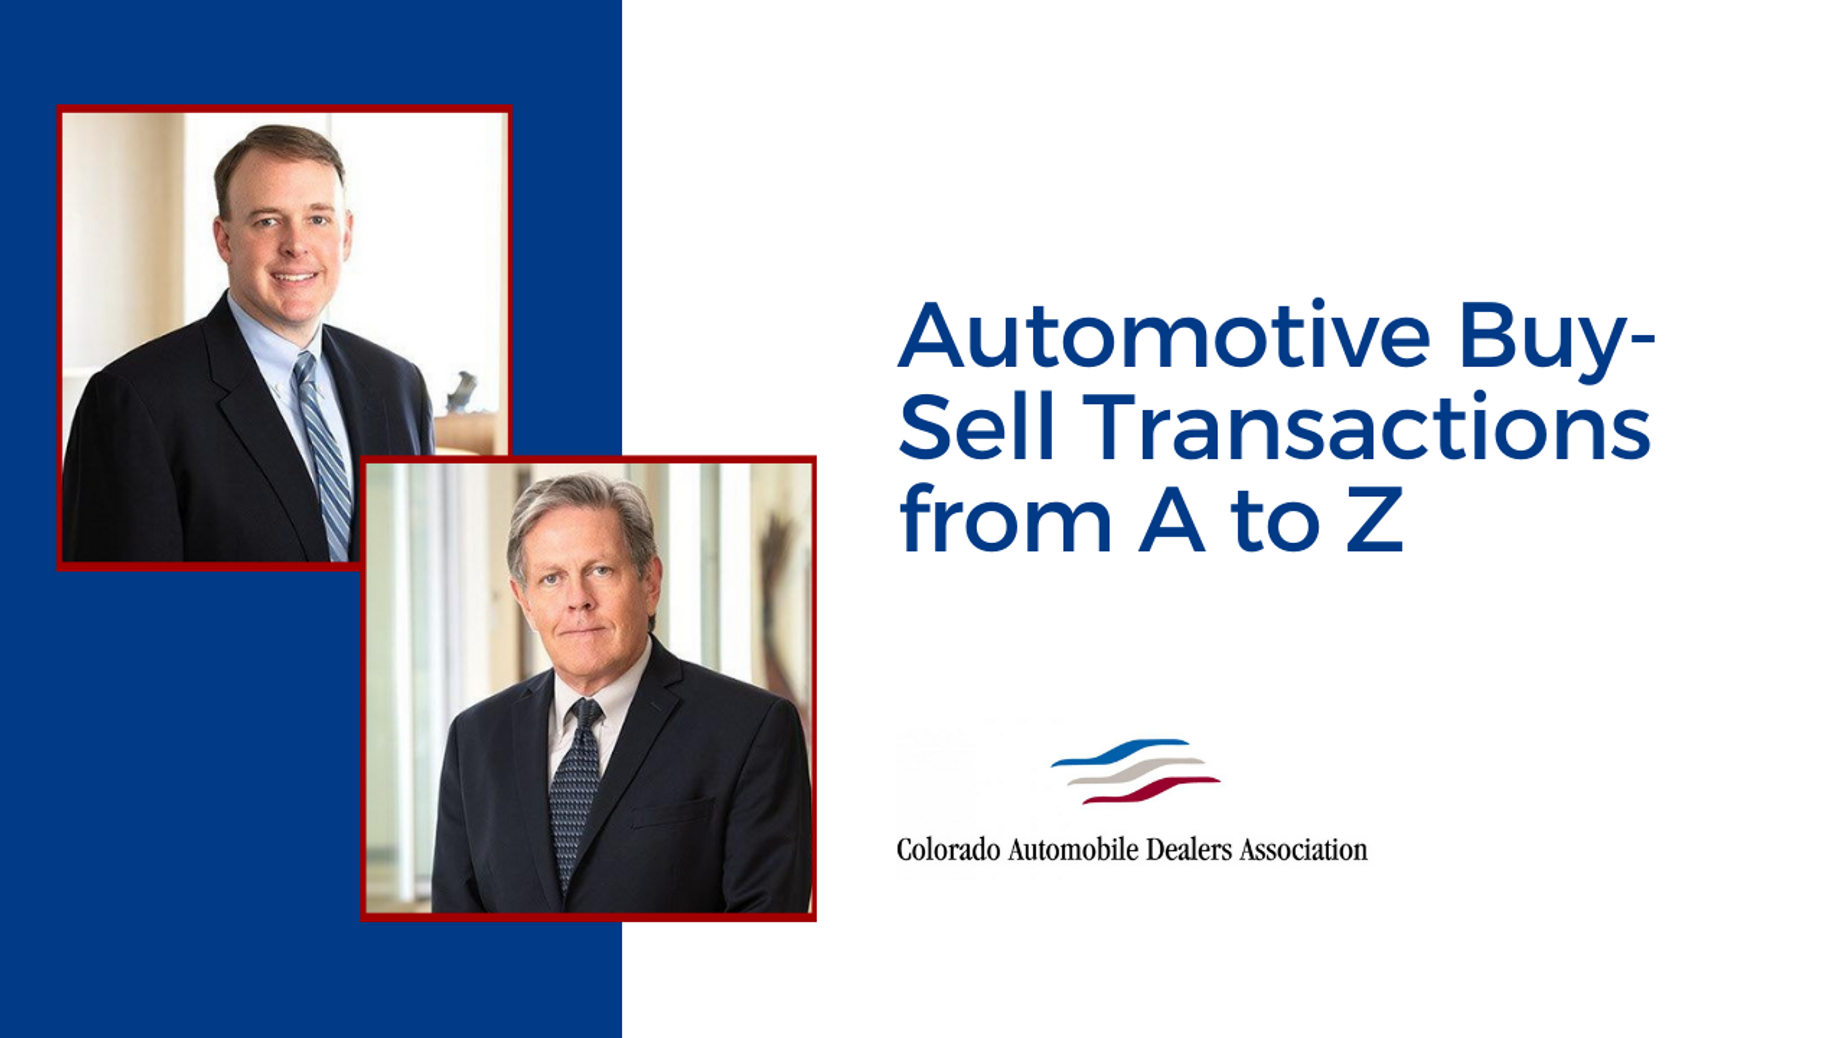 Automotive Buy-Sell Transactions from A to Z